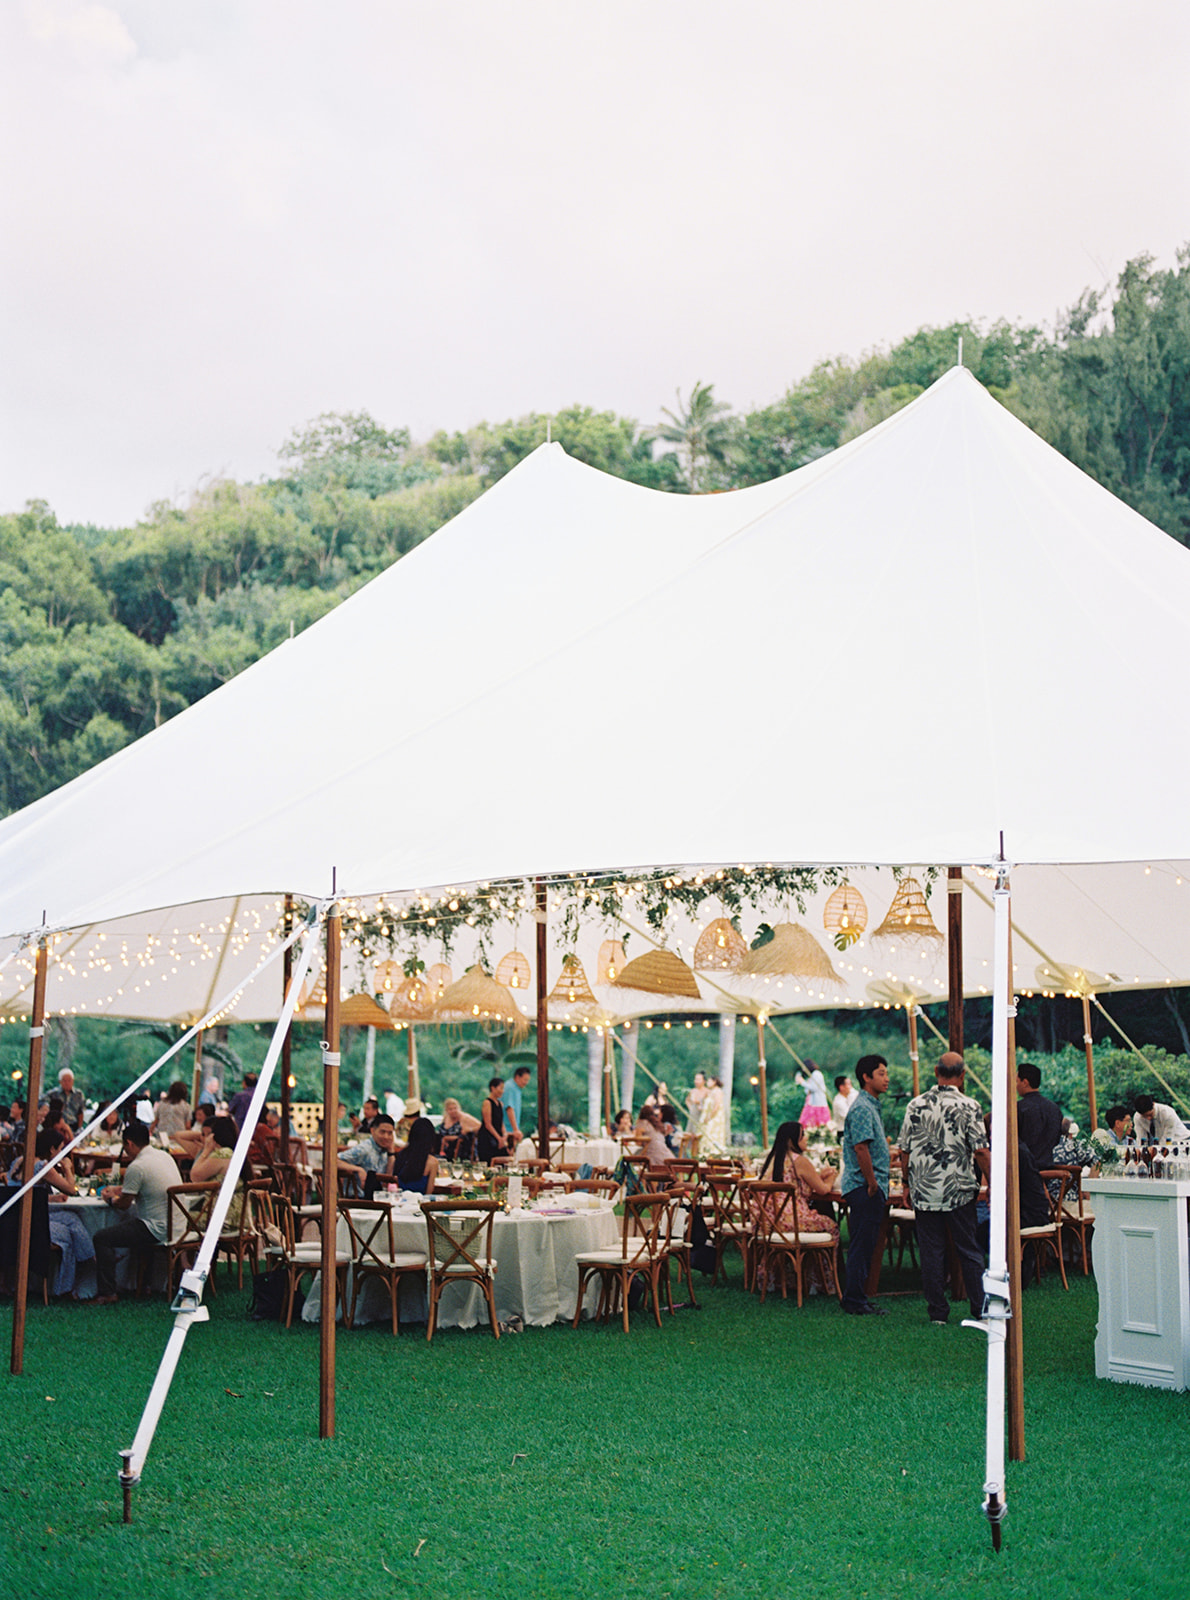 Outdoor event under a white canopy tent with string lights and guests seated at tables on a Wedding in Kauai